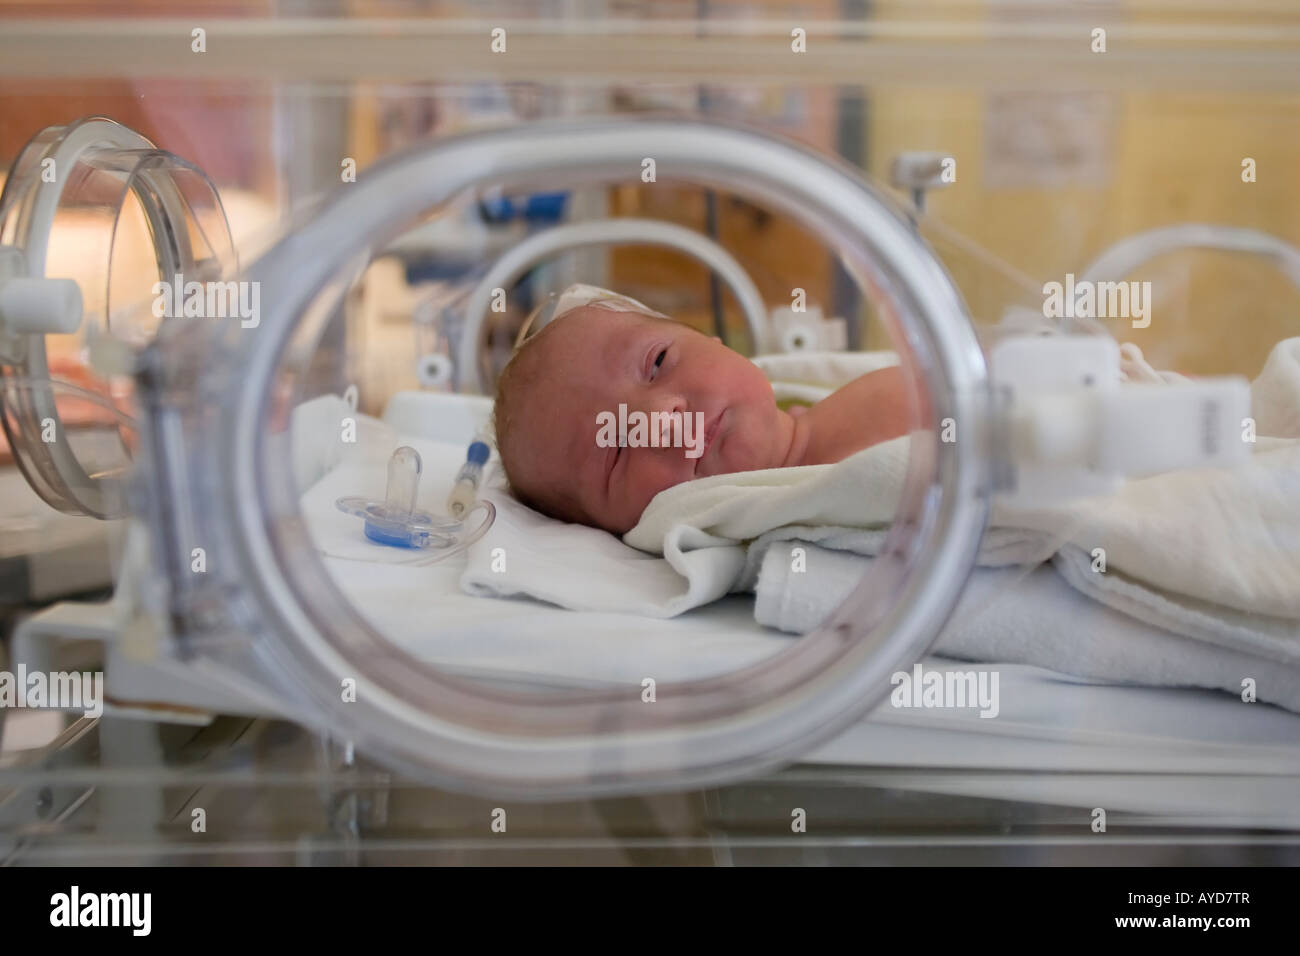 A 5 weeks premature baby lies into an incubator Stock Photo